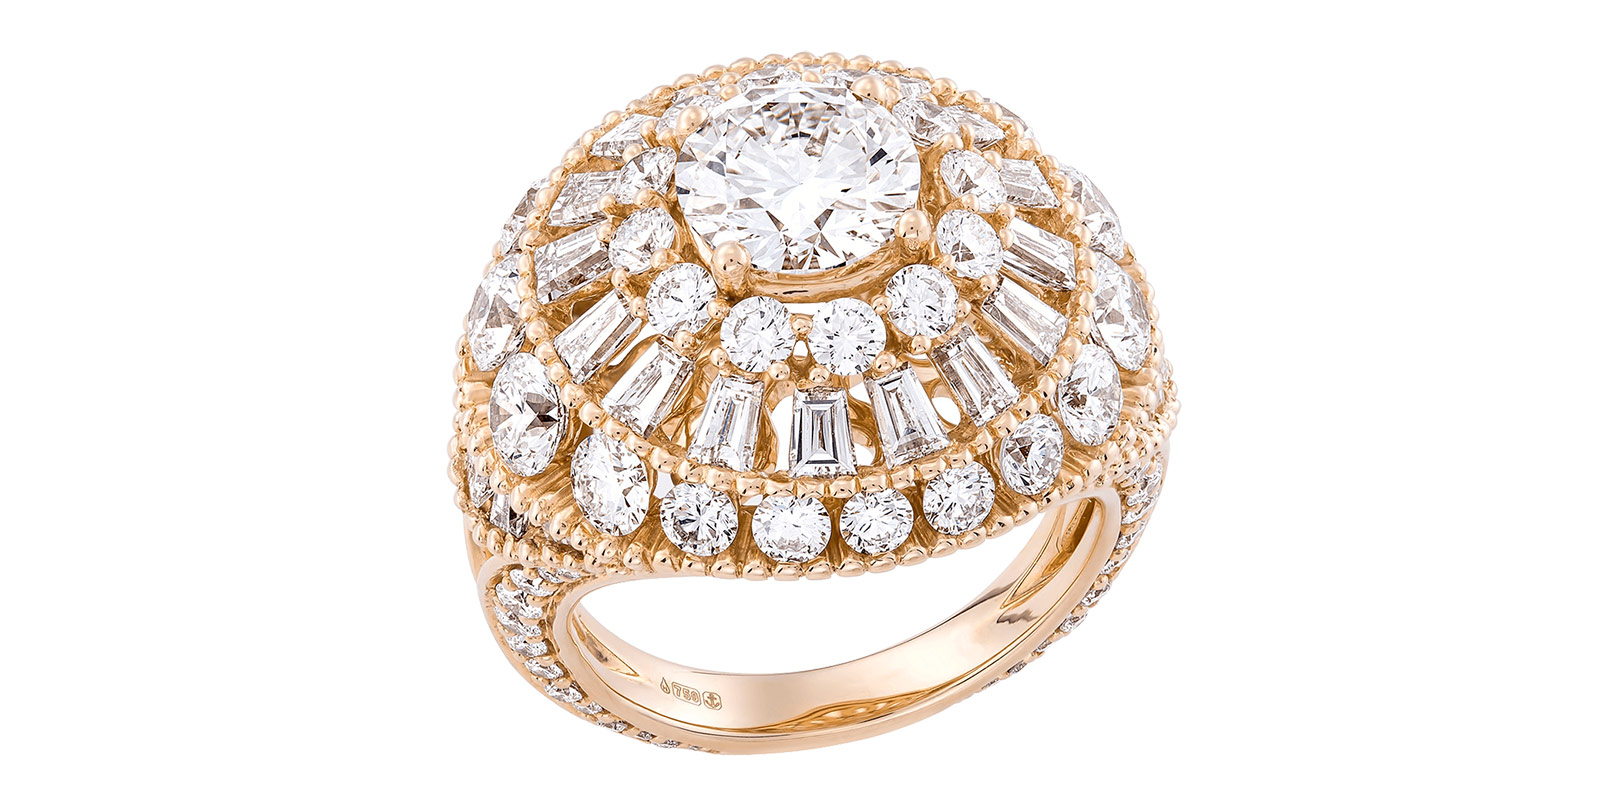 Harakh 'Grand Sunlight' ring with diamonds in yellow gold